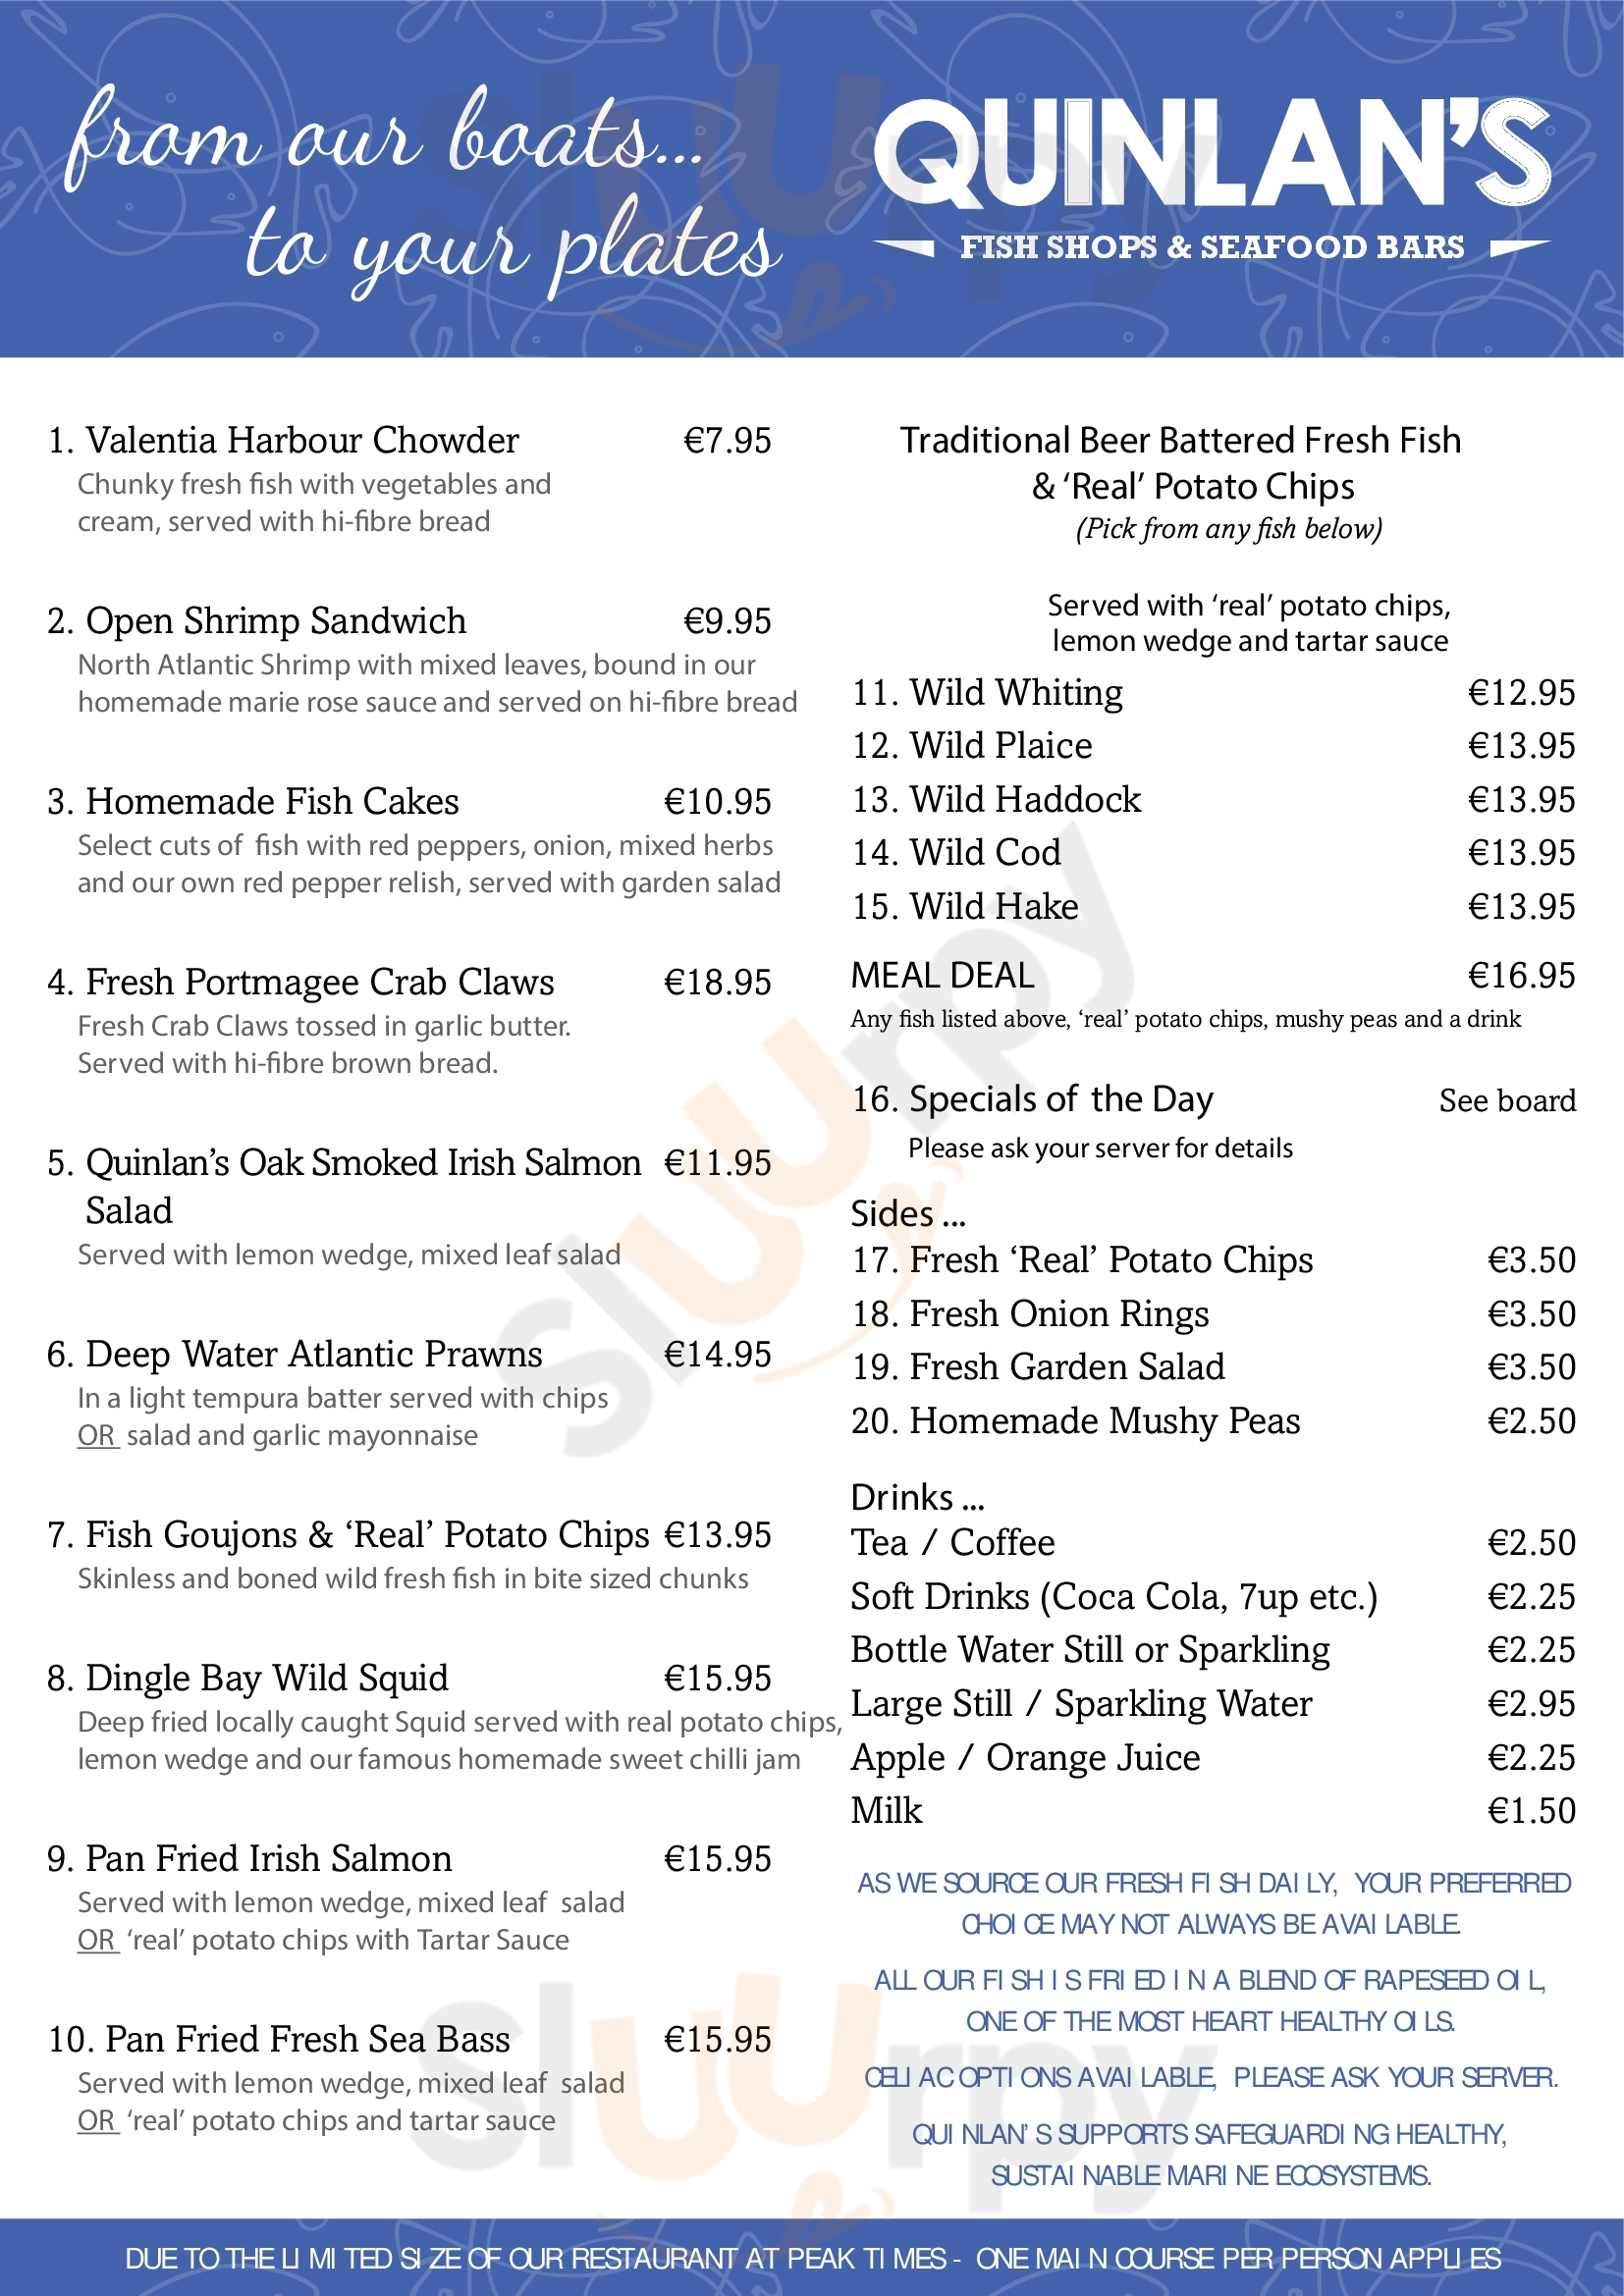 Quinlans Seafood Bar, The Mall Tralee. Tralee Menu - 1